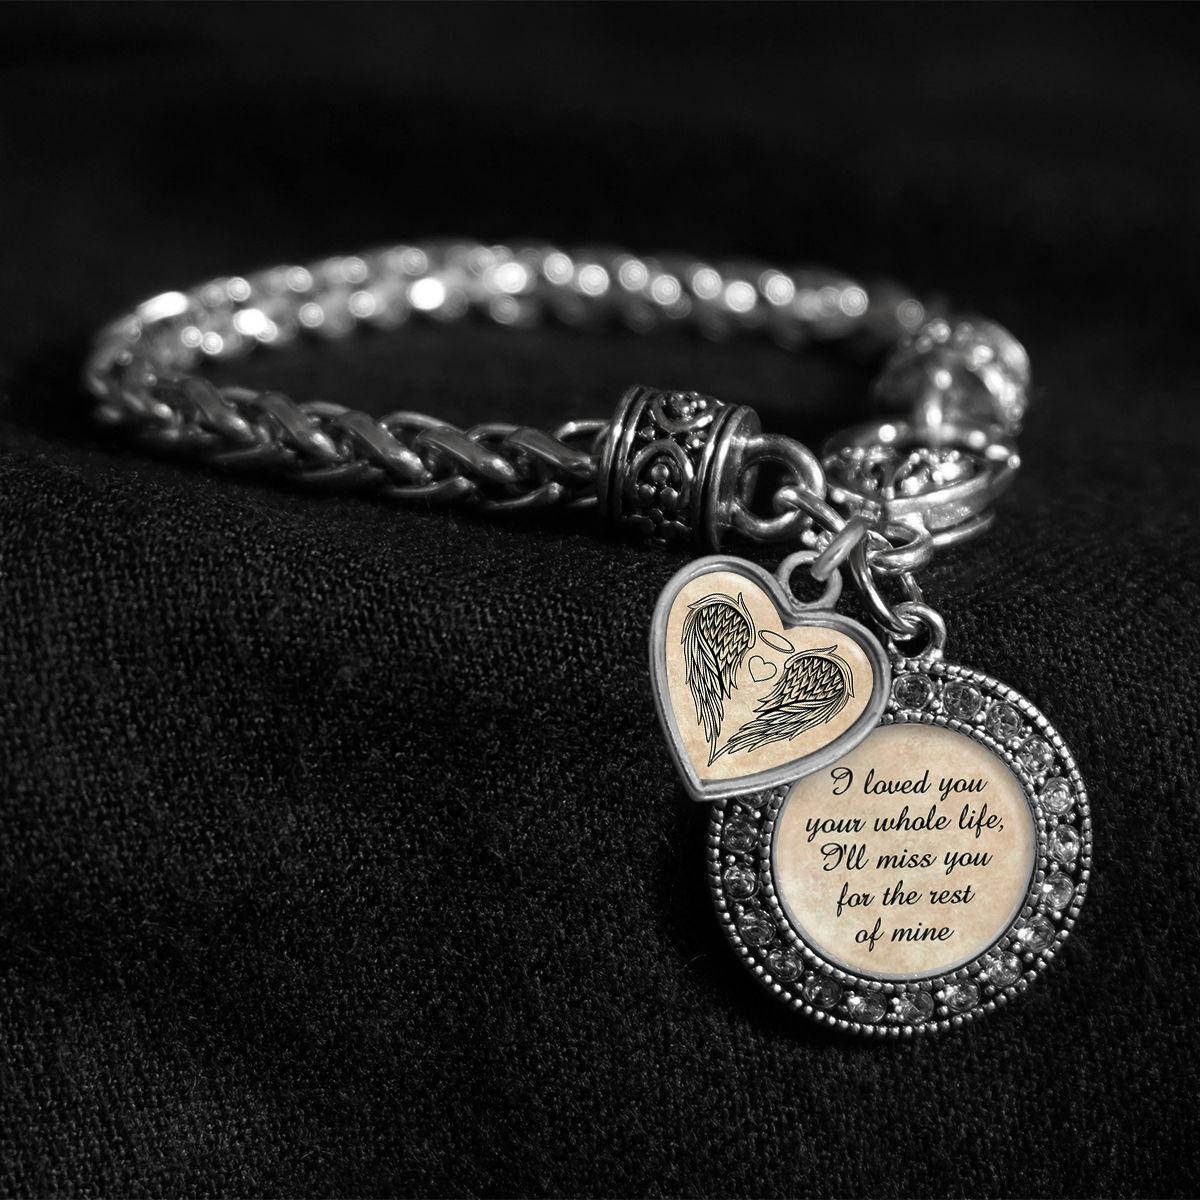 Your Whole Life Silver Braided Clasp Charm Bracelet